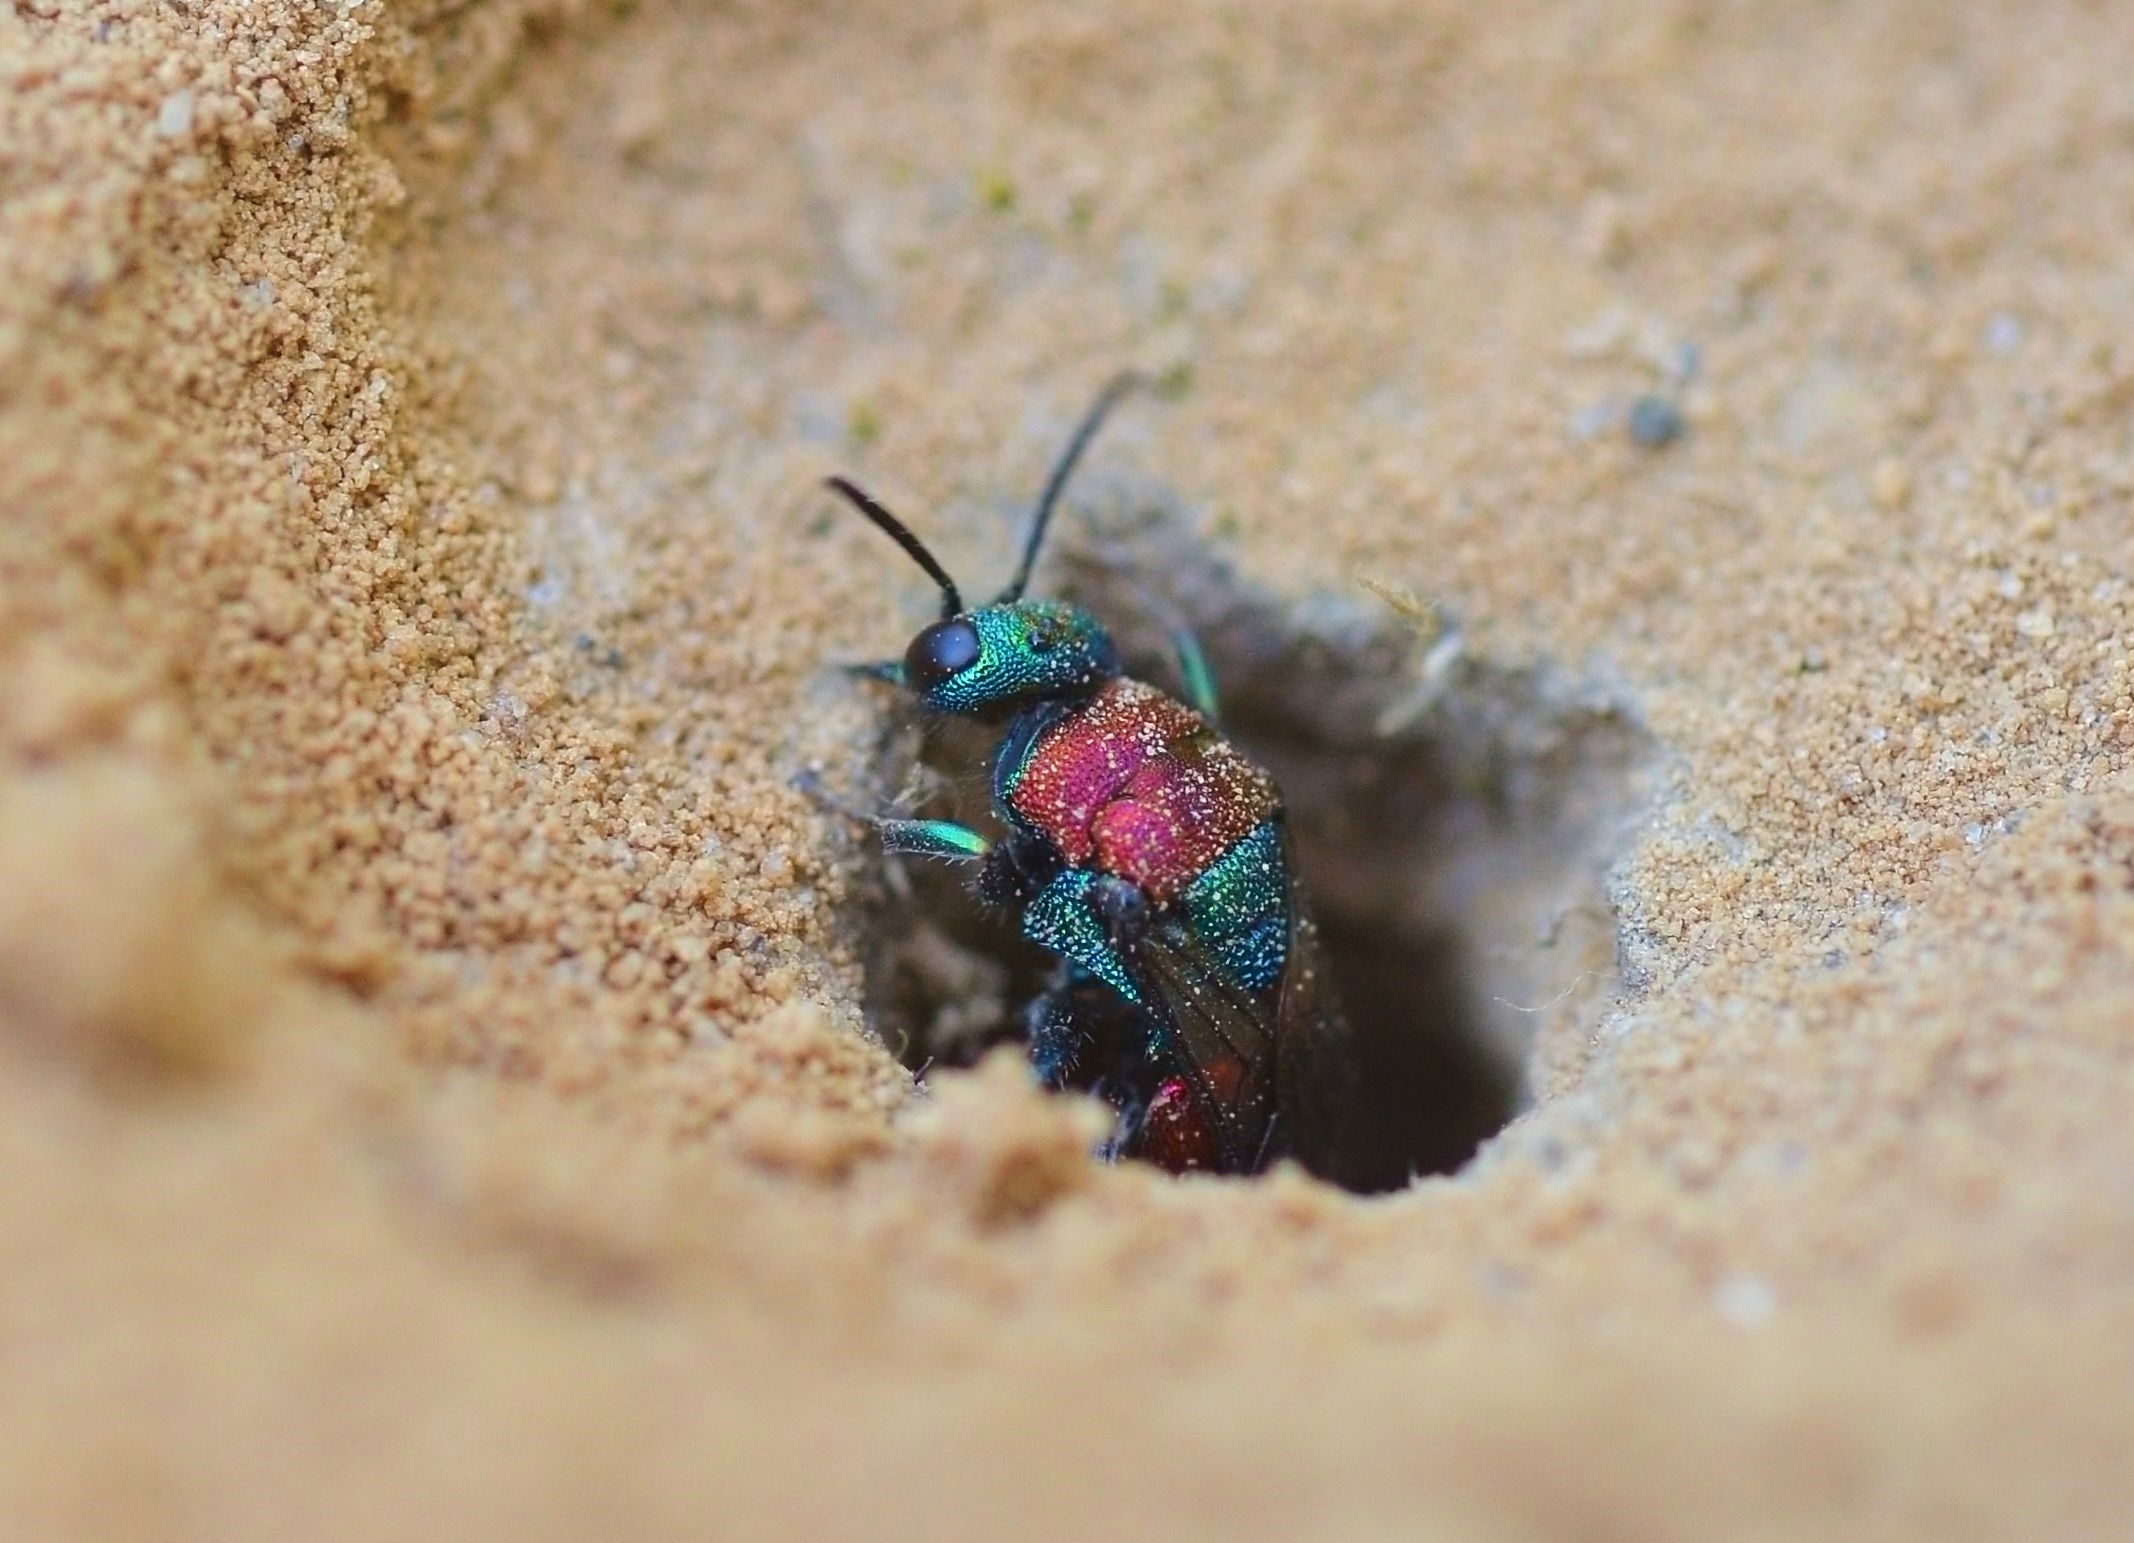 Ruby - tailed wasp | Insect photography : portraits from the micro ...